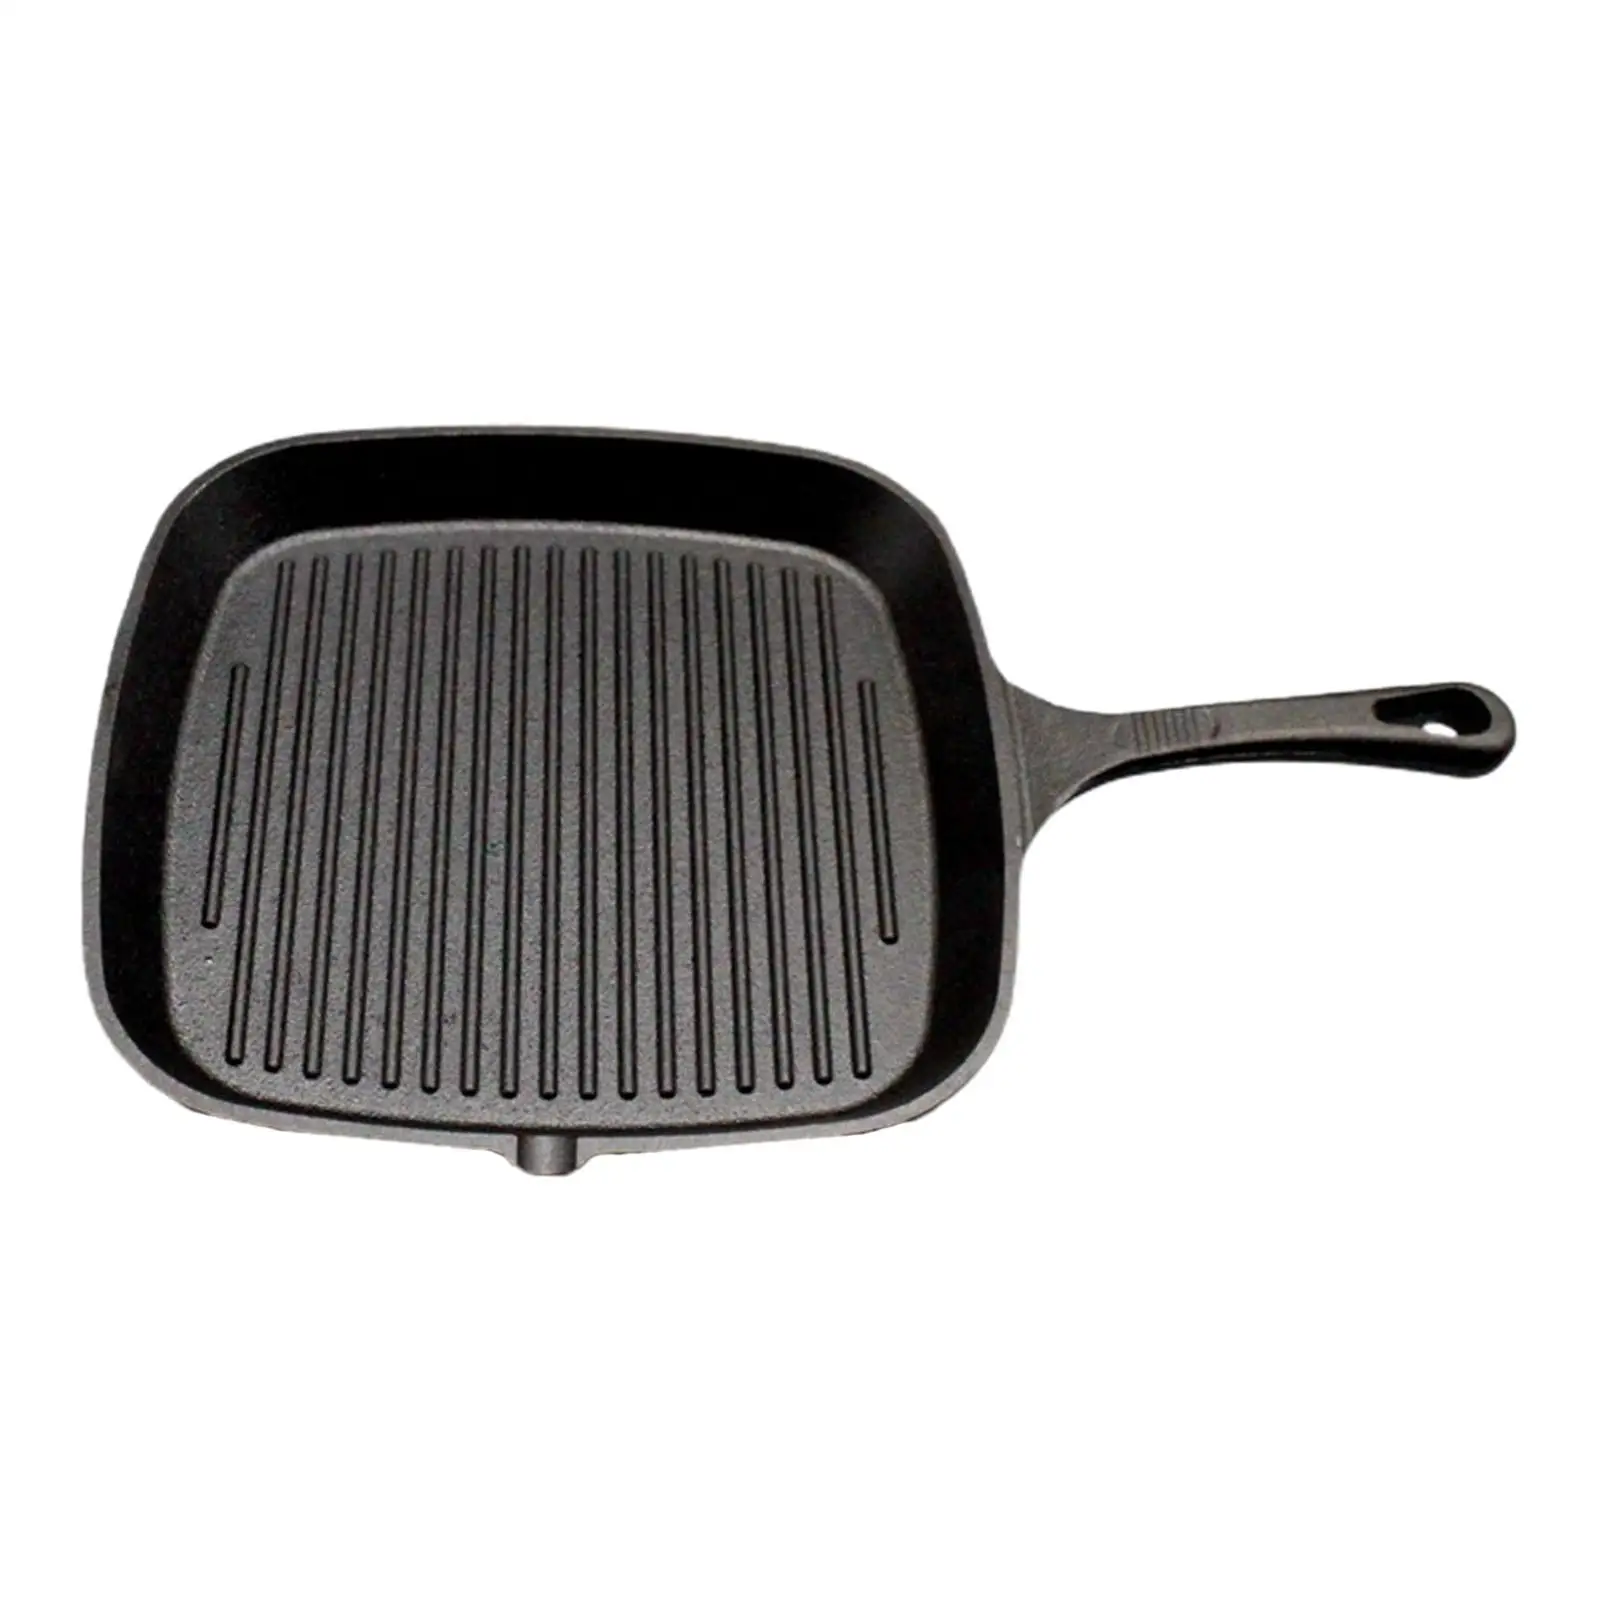 Grill Pans Stove Top Teppanyaki Supplies Square Cooking Frying Pan Griddle Steak Pans for Barbecue Indoor Camping Home